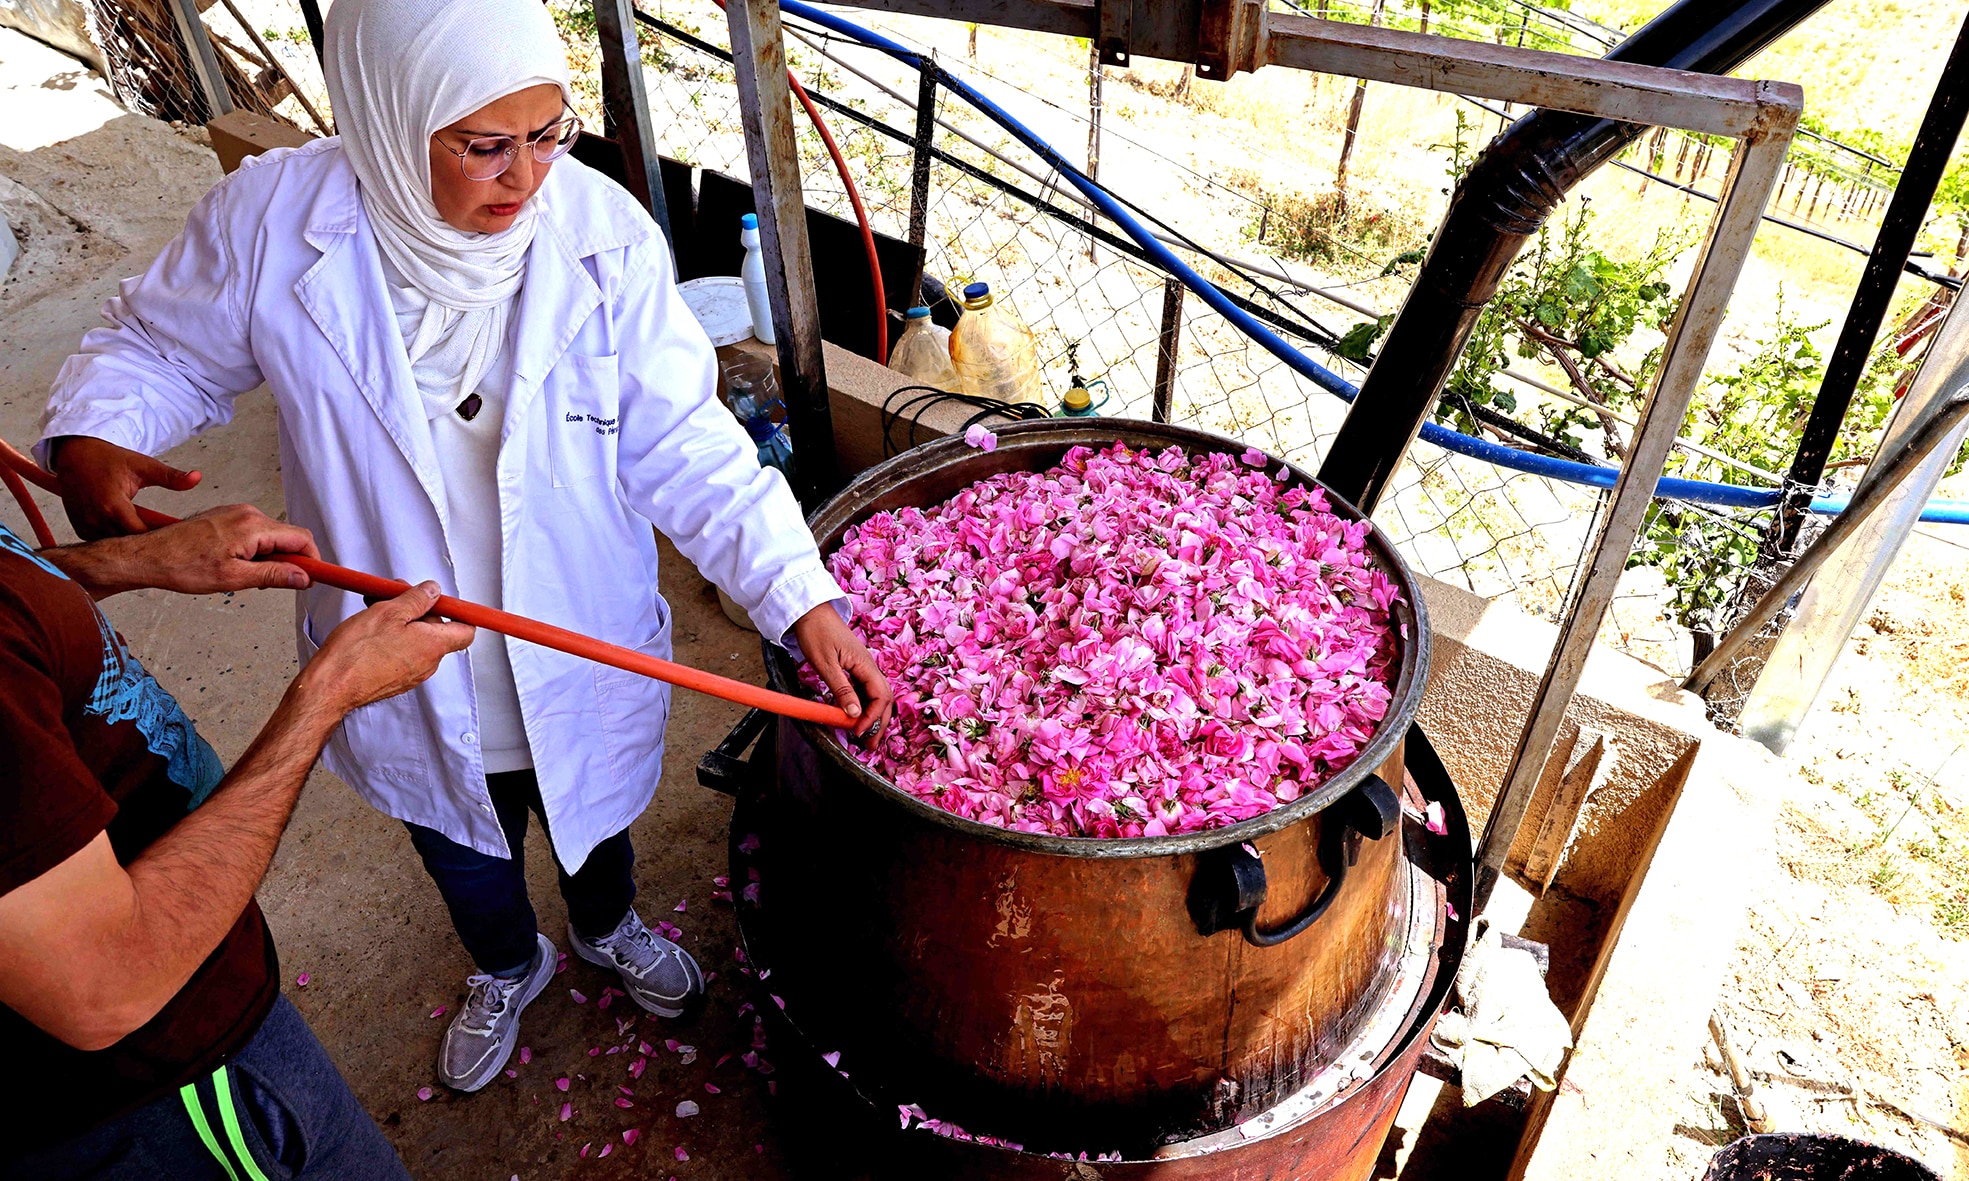 Zahraa Sayed Ahmed produces rose water from Damascena (Damask) roses, at her house in the village of Qsarnaba.